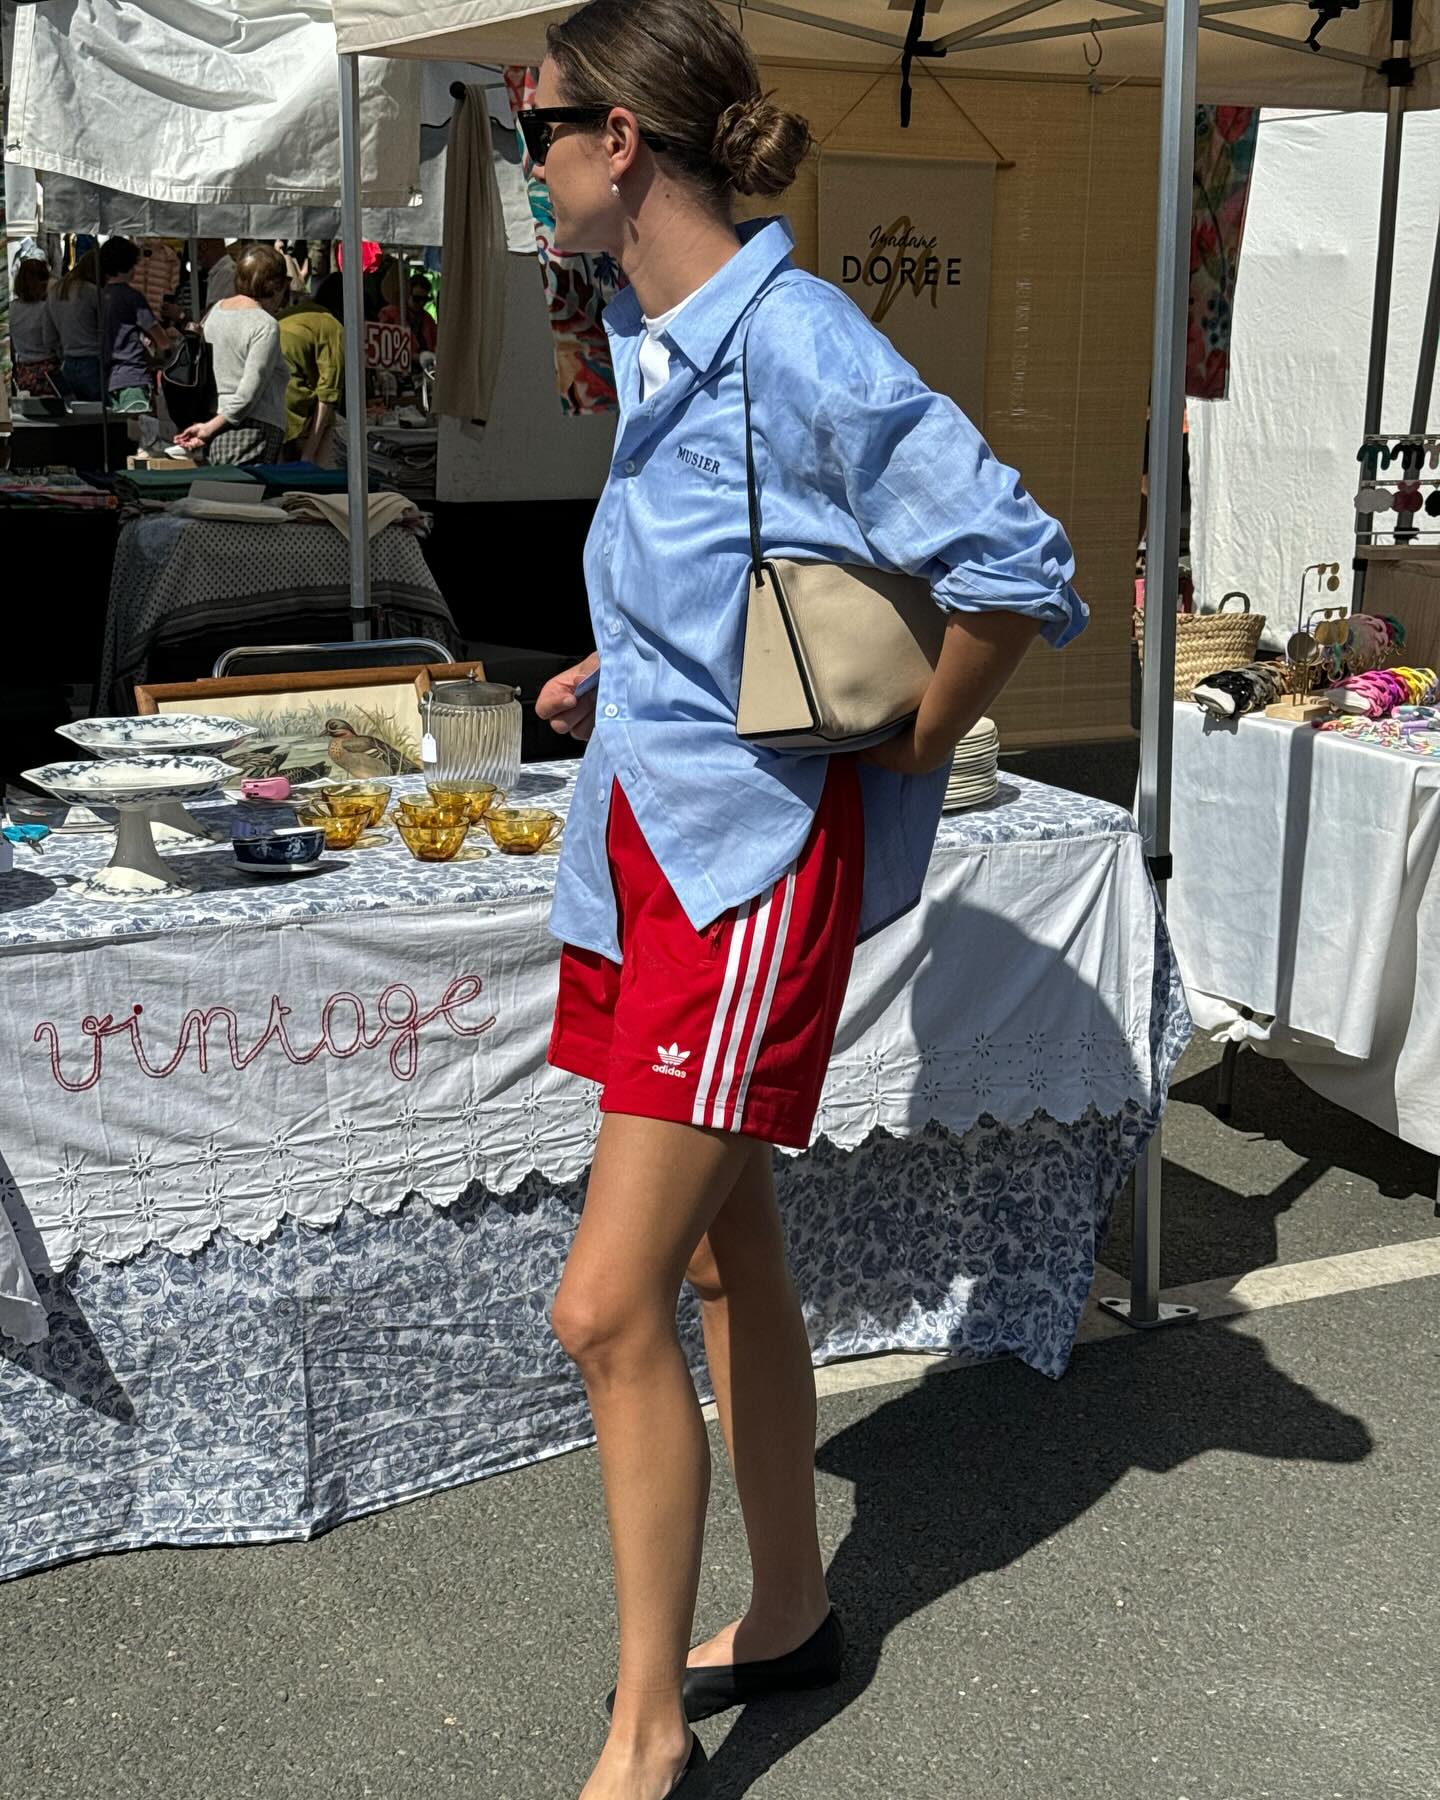 French fashion influencer Anne-Laure Mais poses at a farmer's market wearing a low bun, blue button-down shirt, tan shoulder bag, red striped Adidas track shorts, and black ballet flats